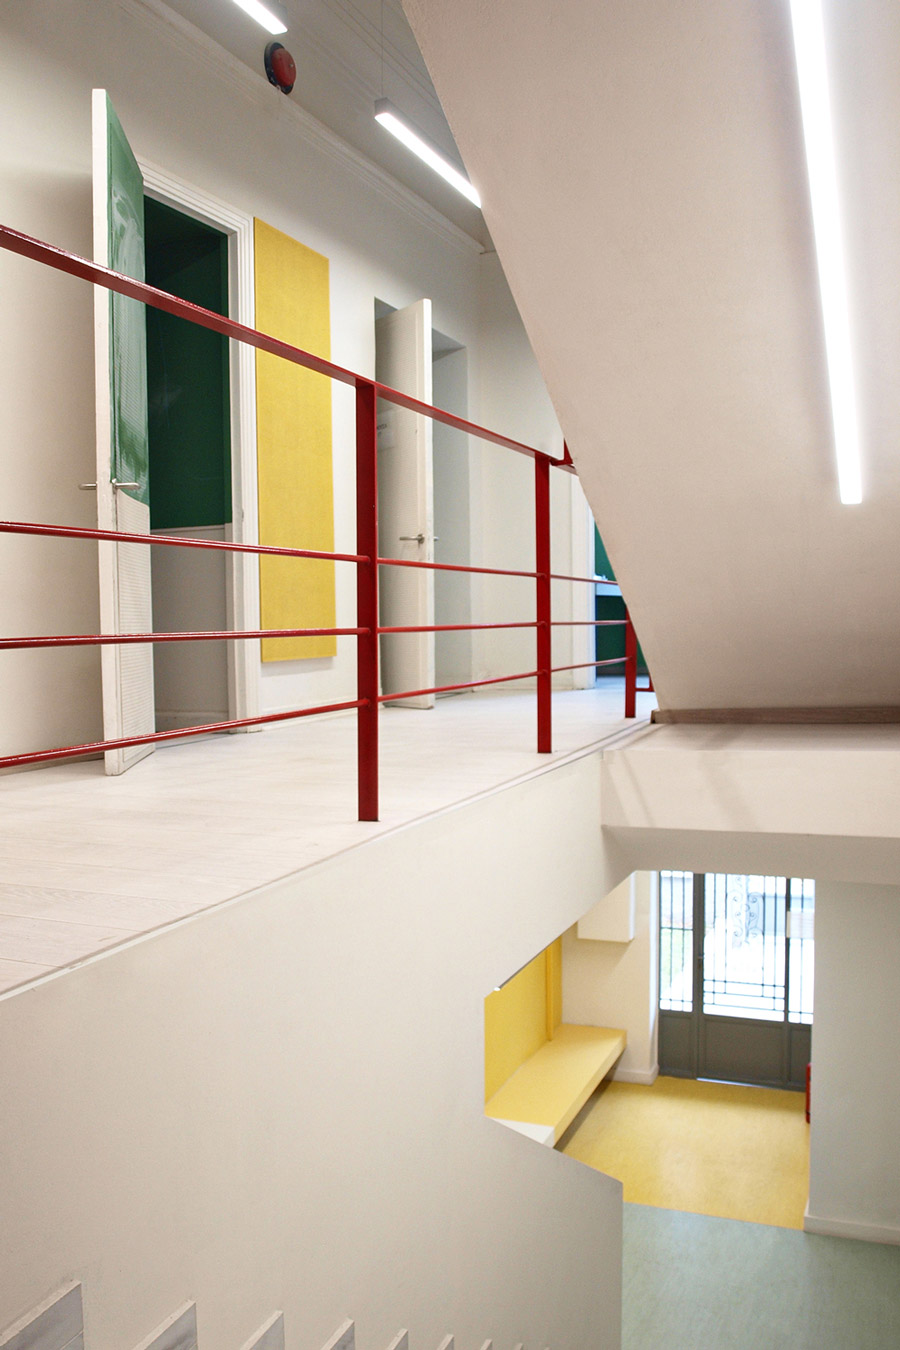 Colourful rectangular surfaces in the main corridor and the staircase